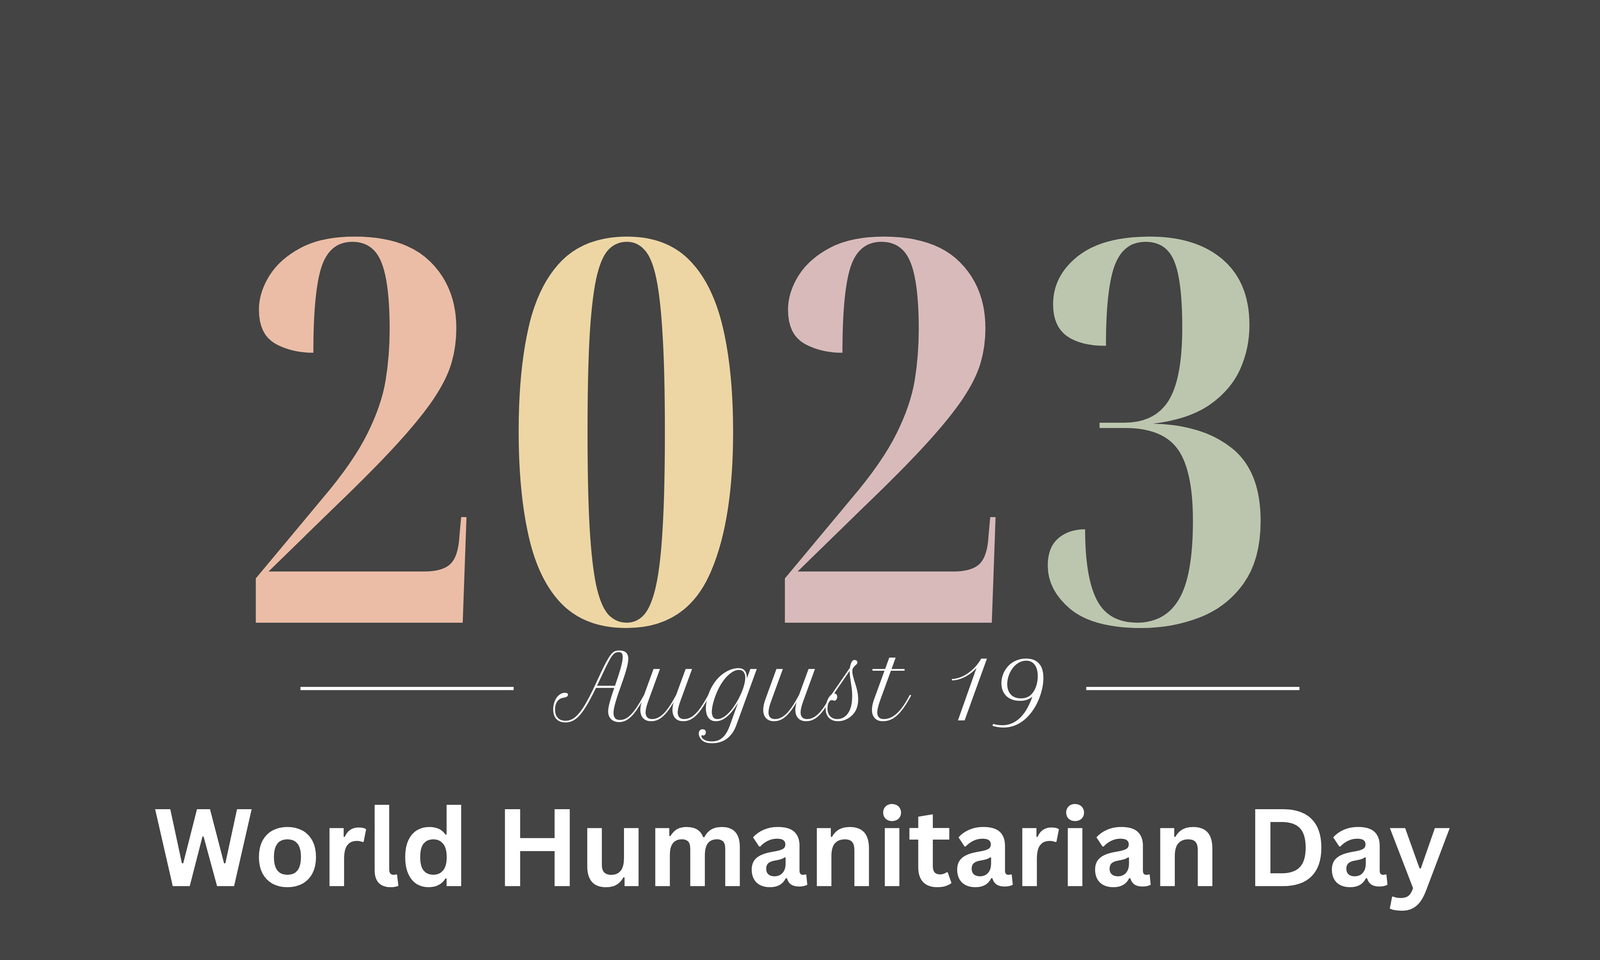 World Humanitarian Day: Honoring Heroes of Compassion